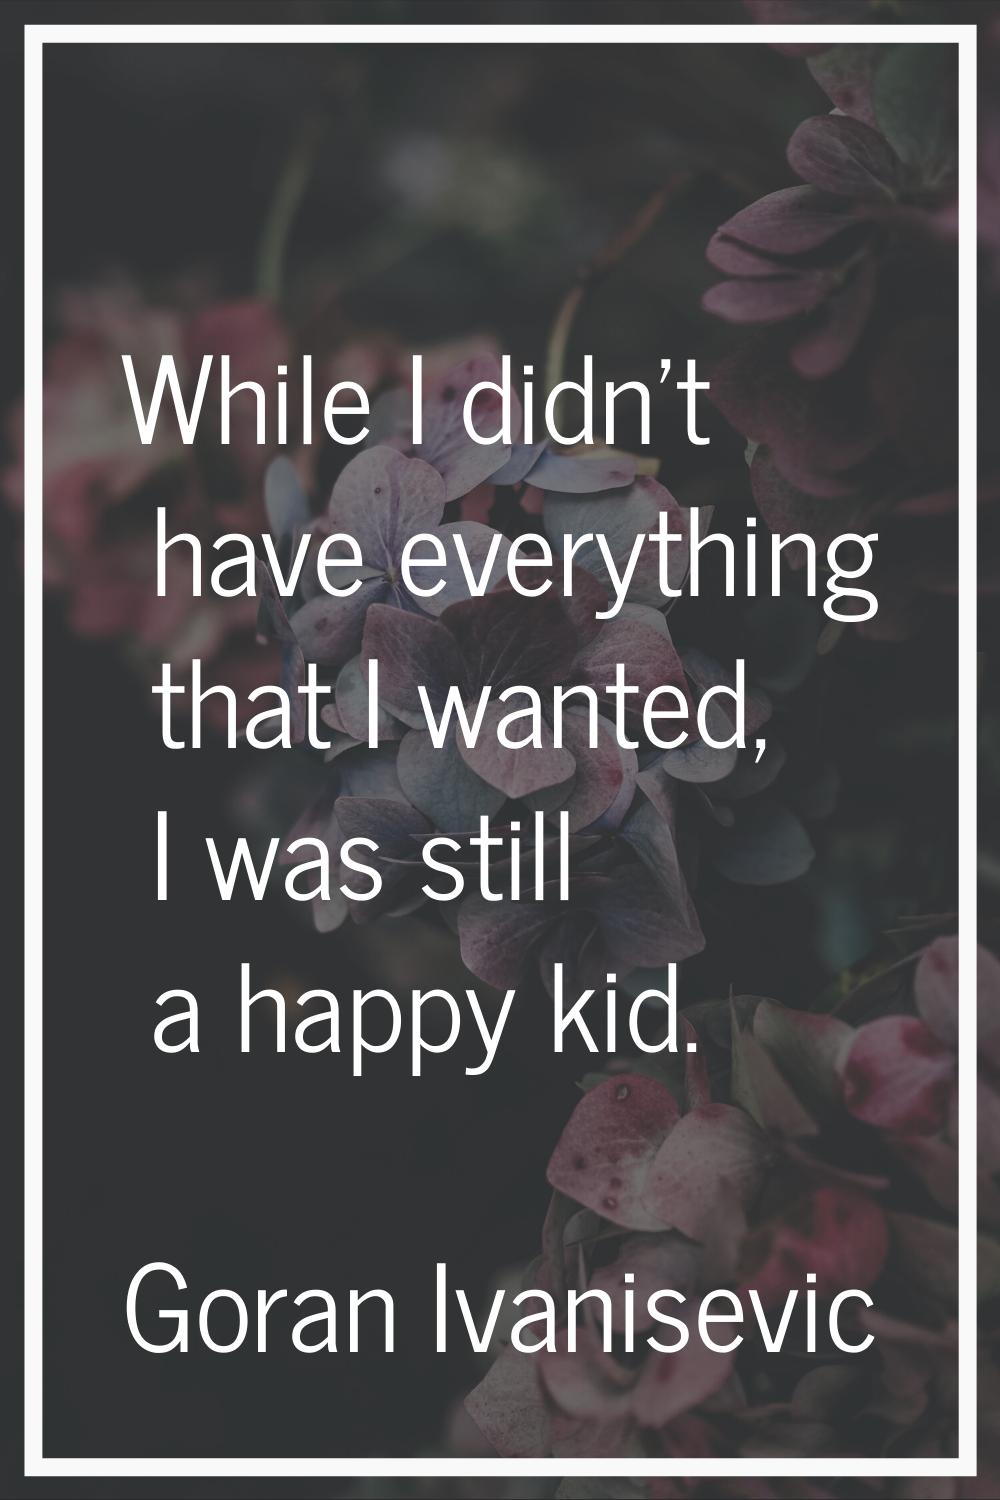 While I didn't have everything that I wanted, I was still a happy kid.